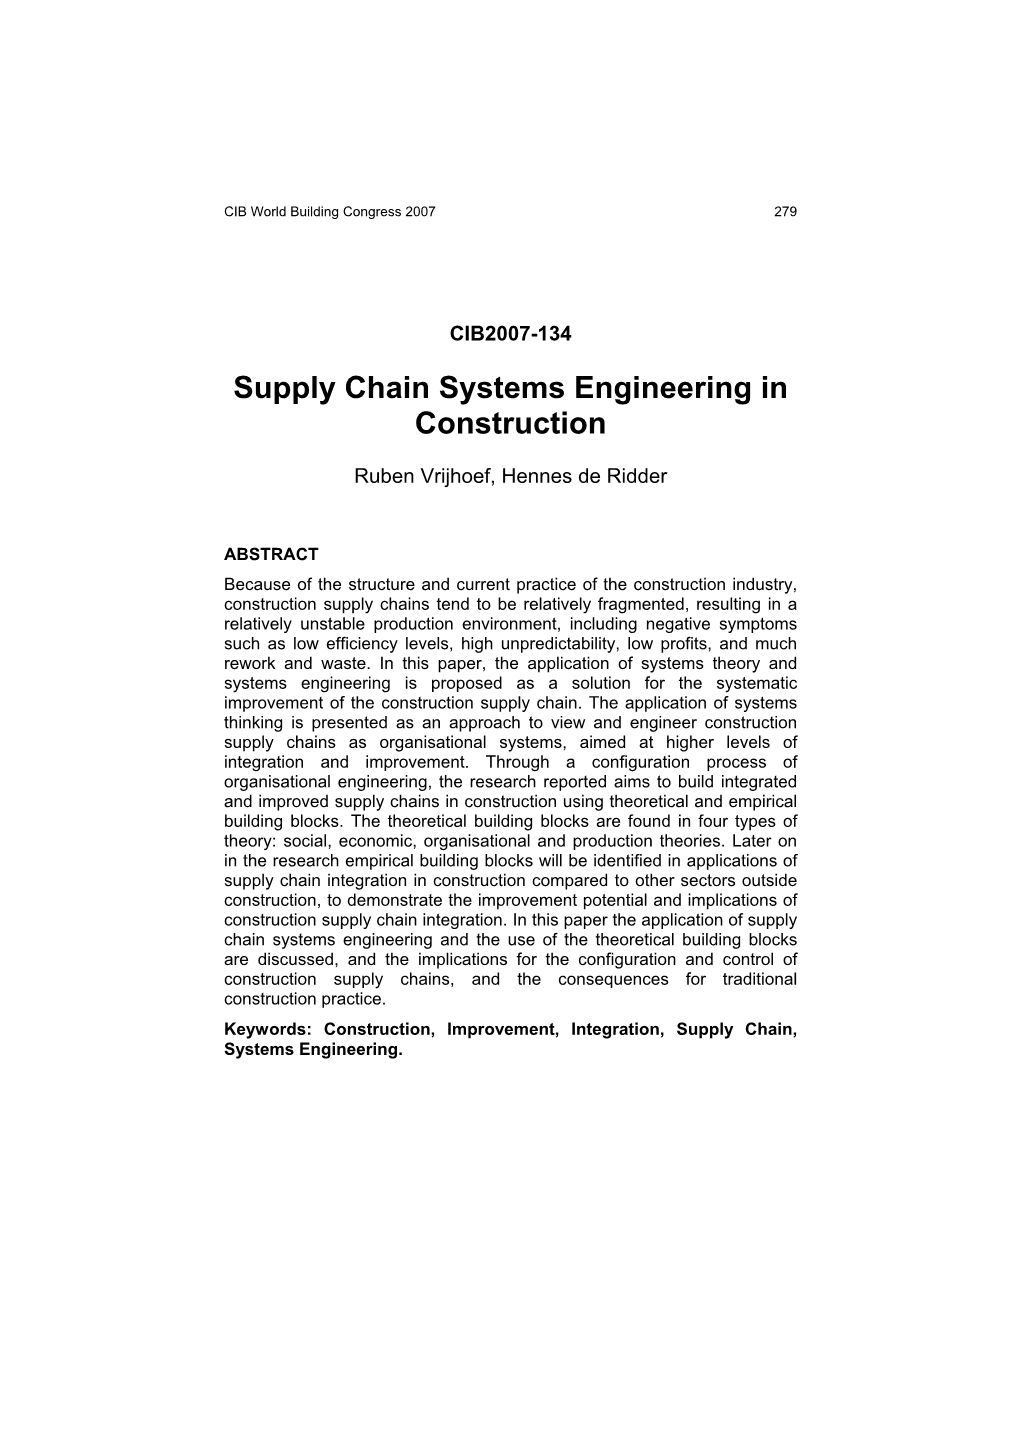 Supply Chain Systems Engineering in Construction